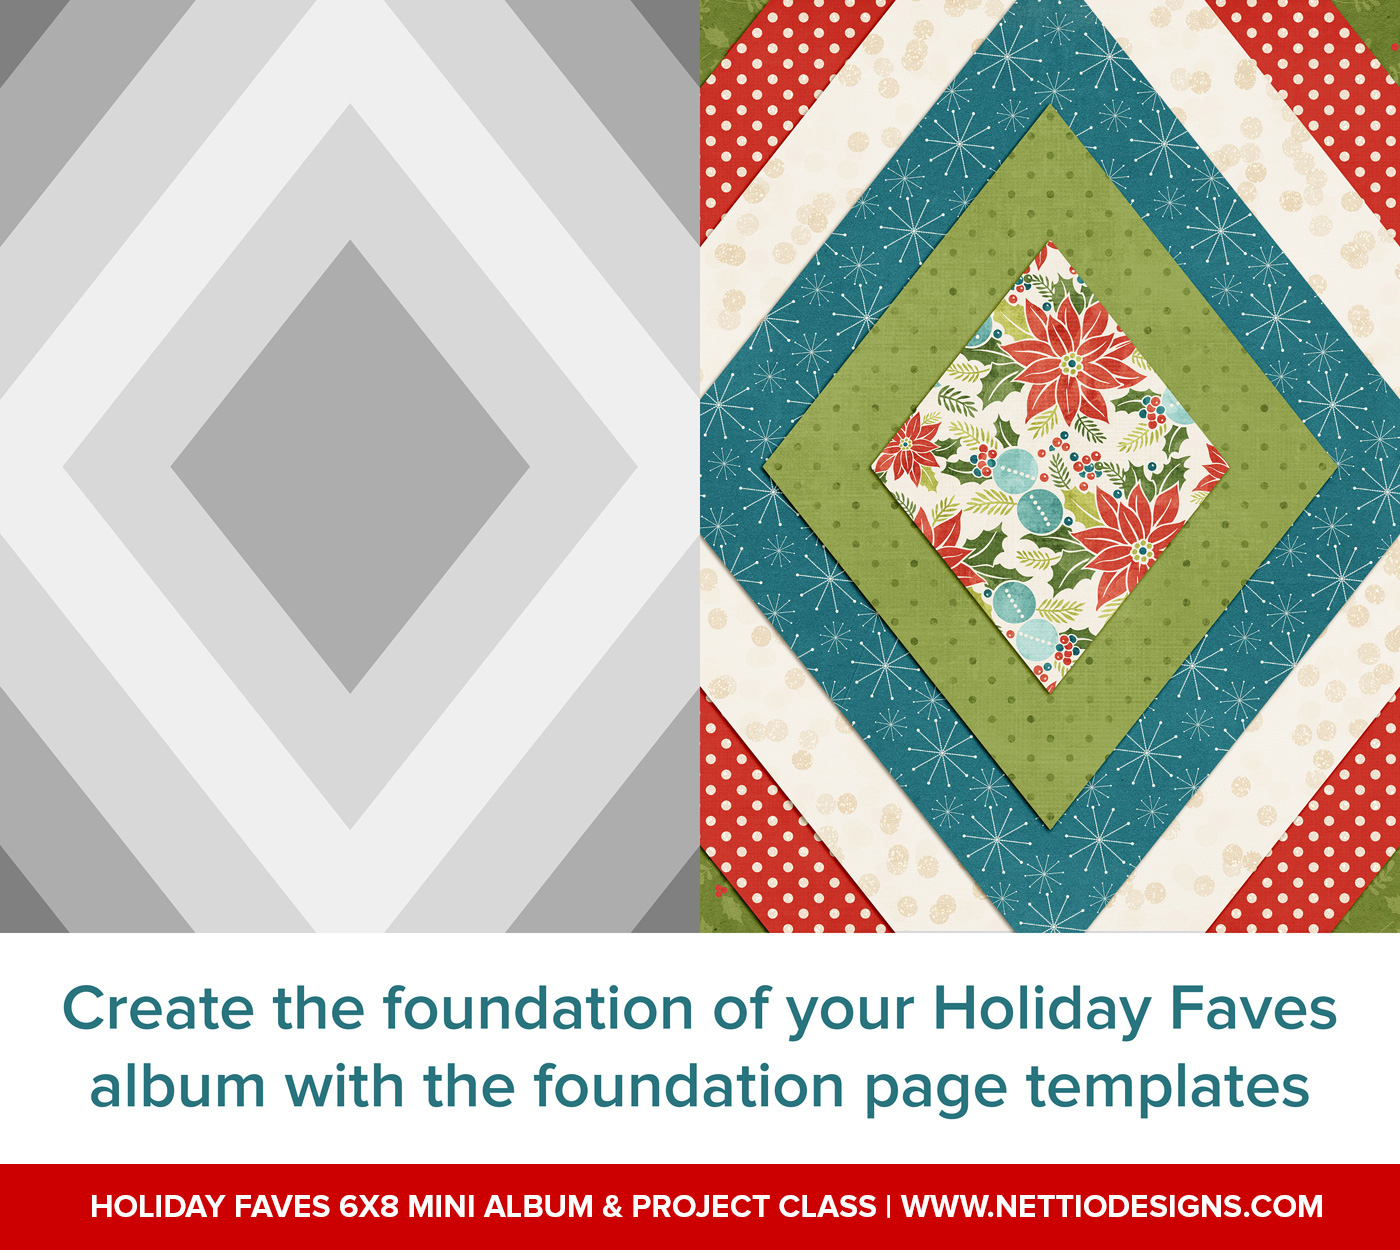 nettiodesigns_Holiday-Faves-Mini-Album-How-To-Foundation